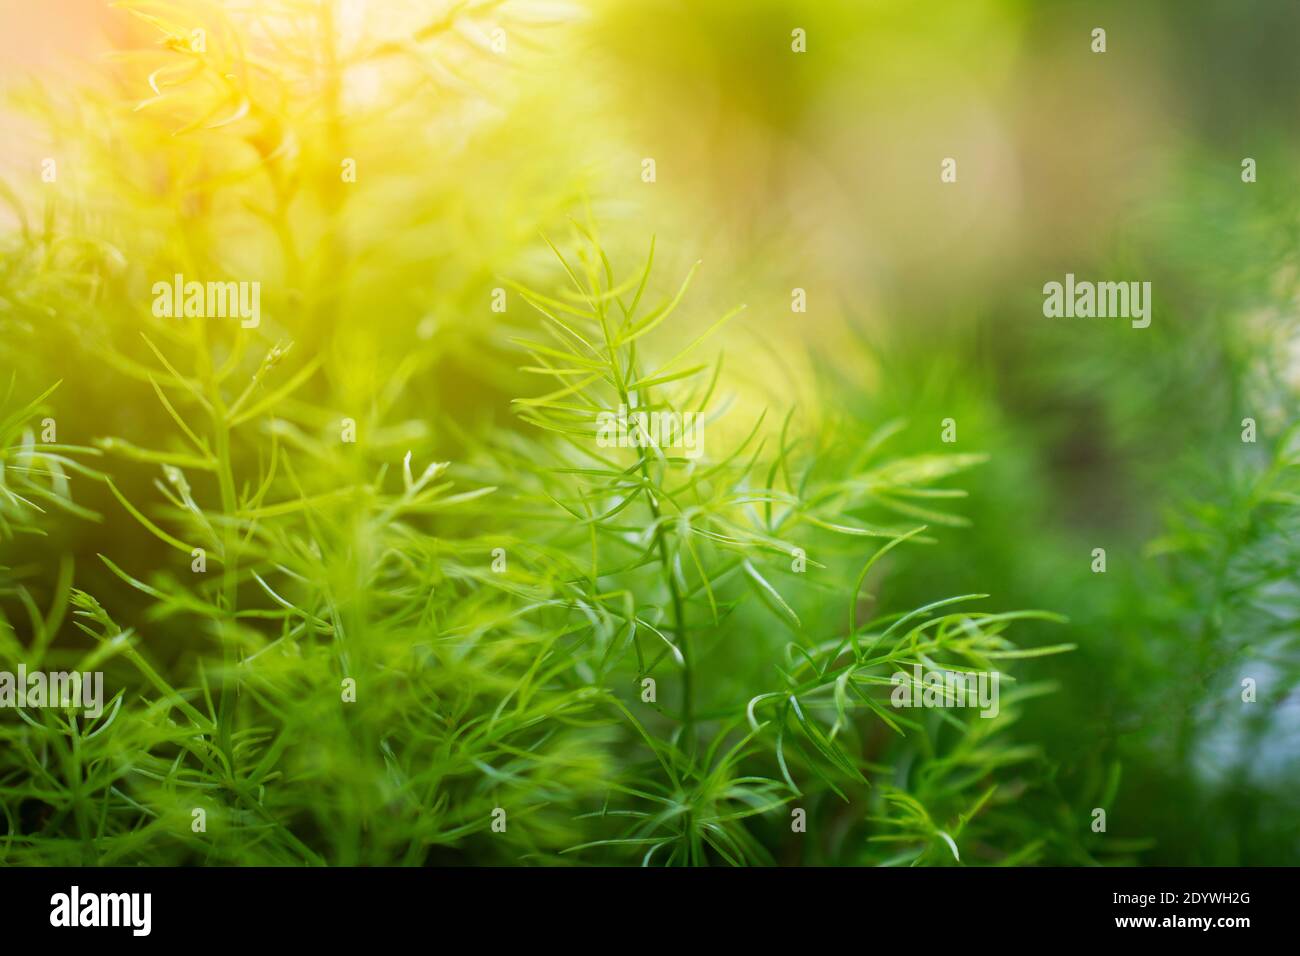 green leaf on blurred greenery background concept Stock Photo - Alamy